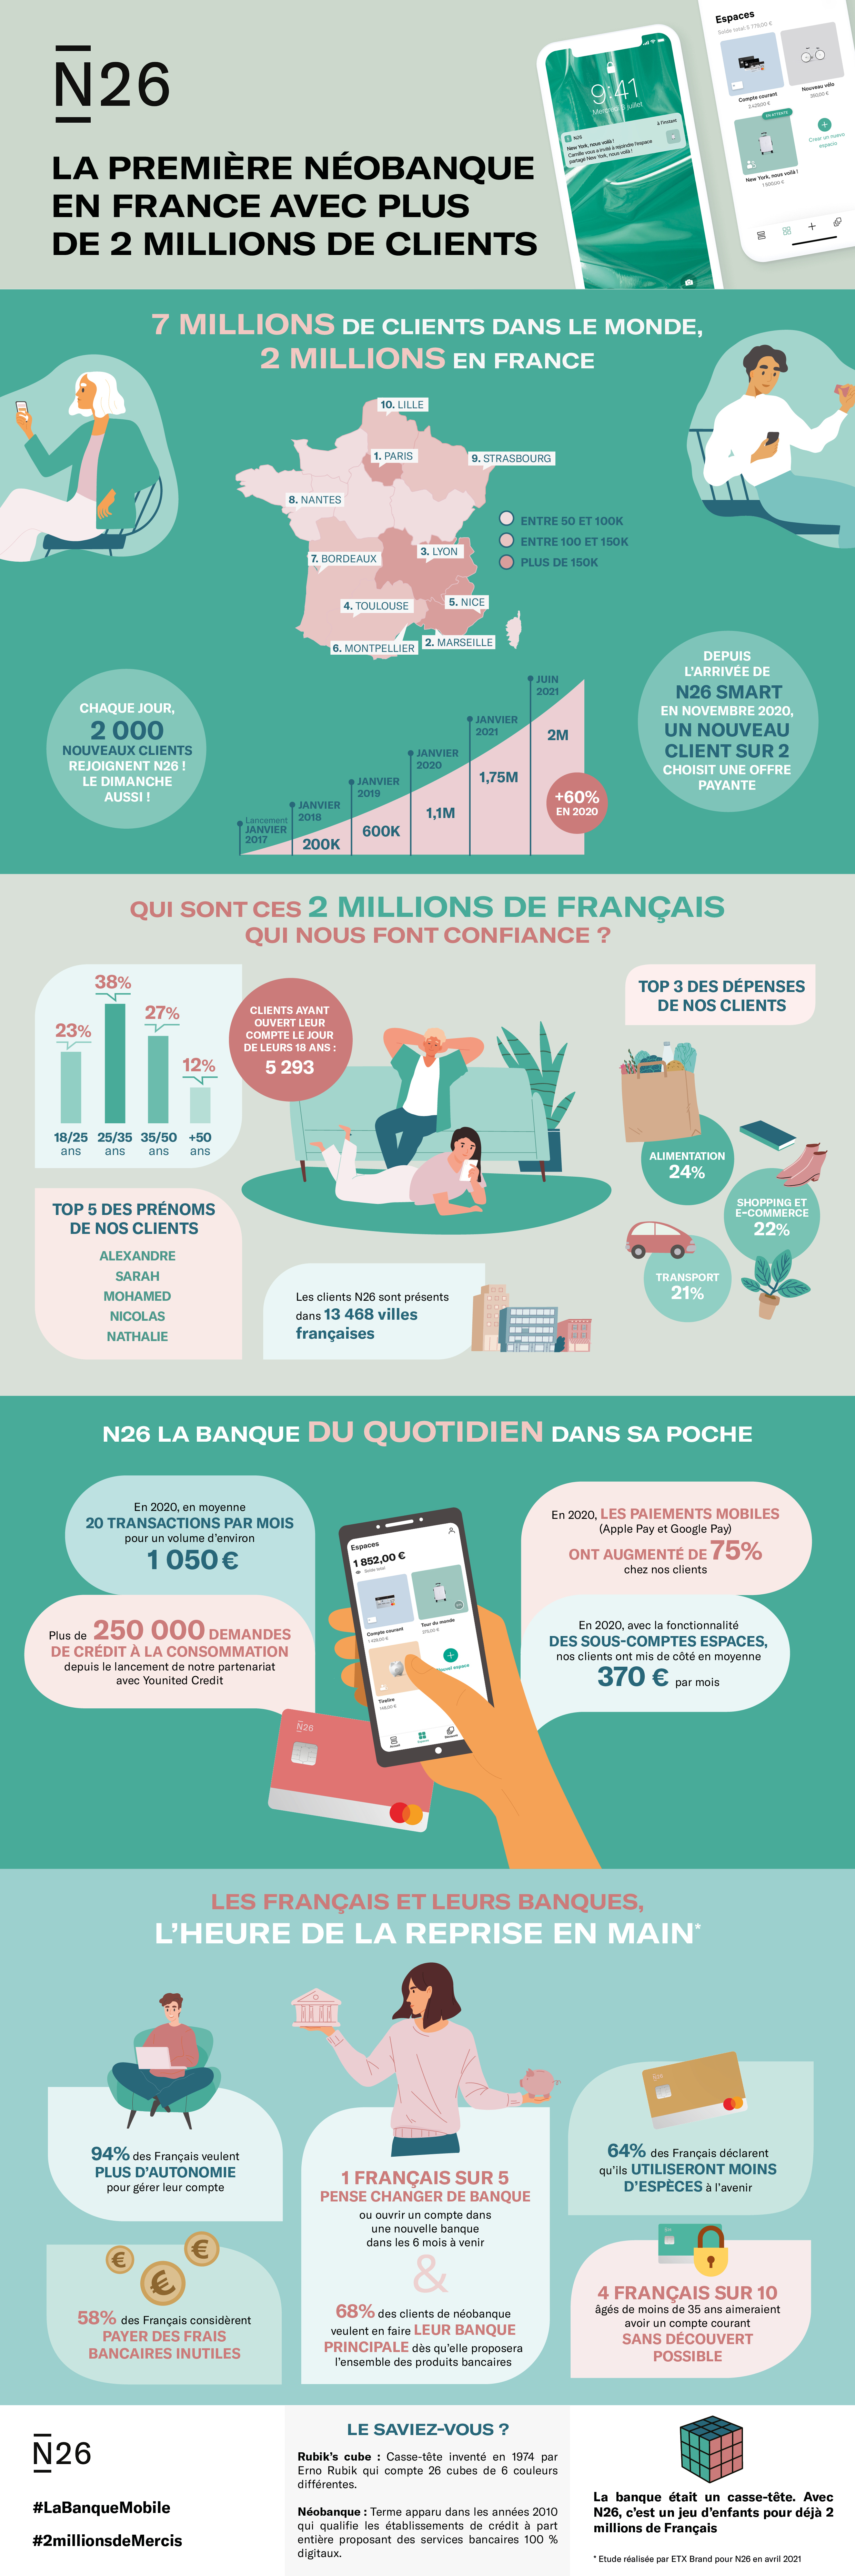 press release 2 mill fr - infographic 